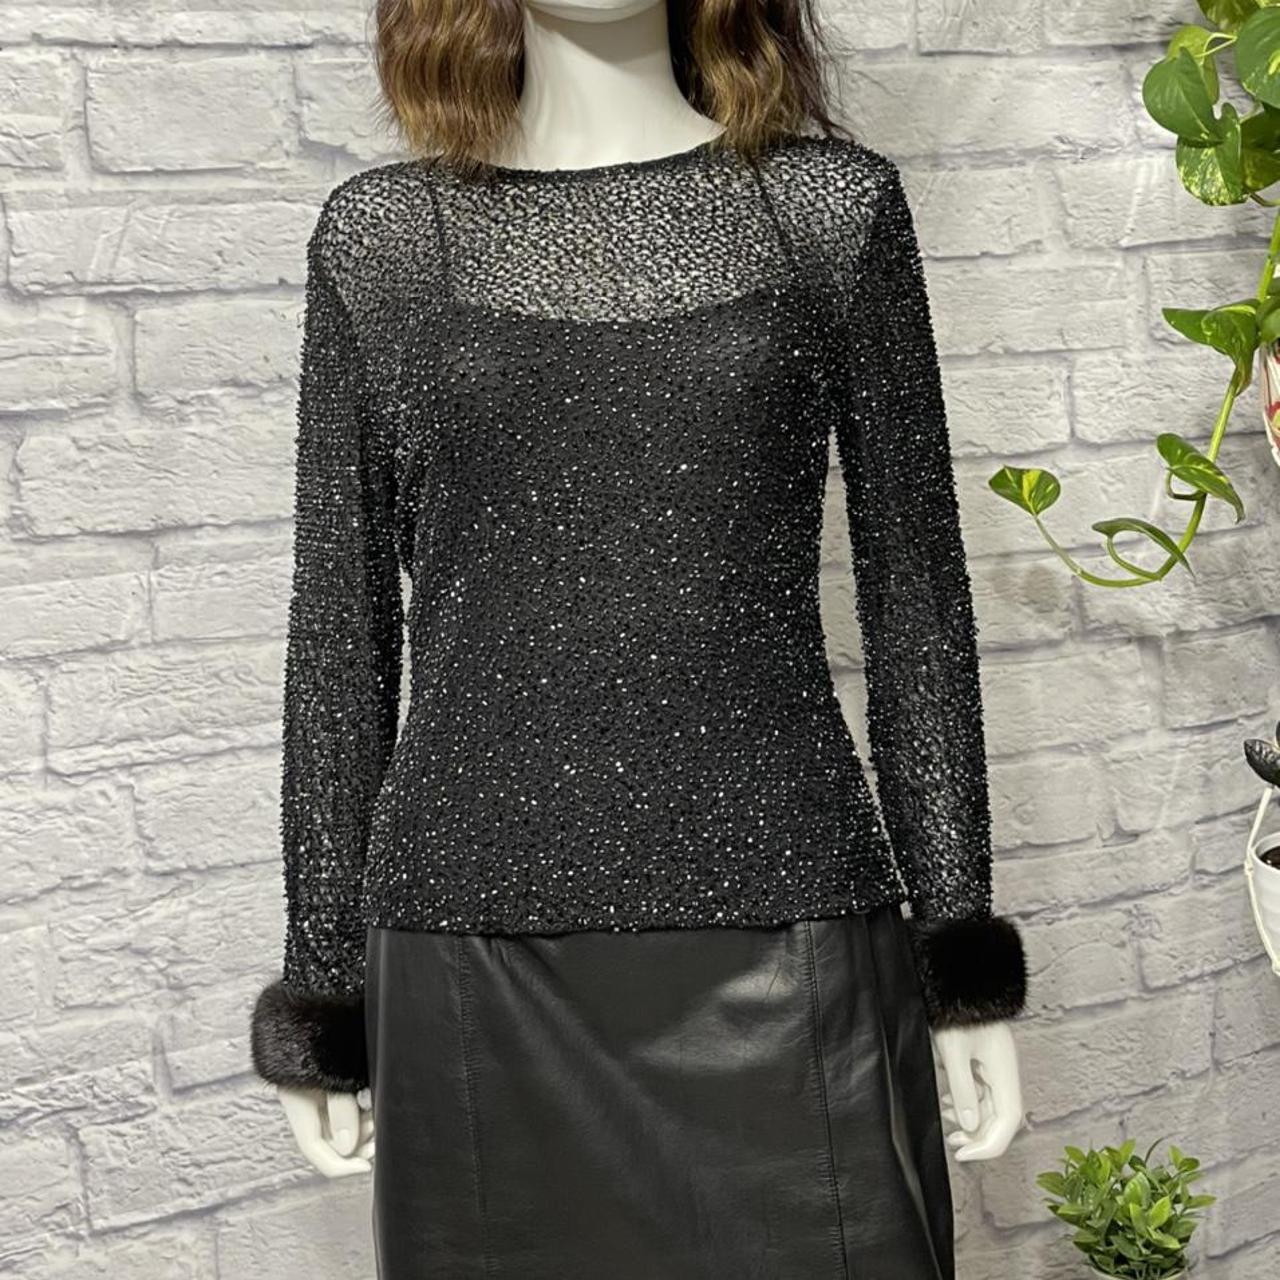 Product Image 2 - ▪️Stunning Vintage Beaded Blouse with